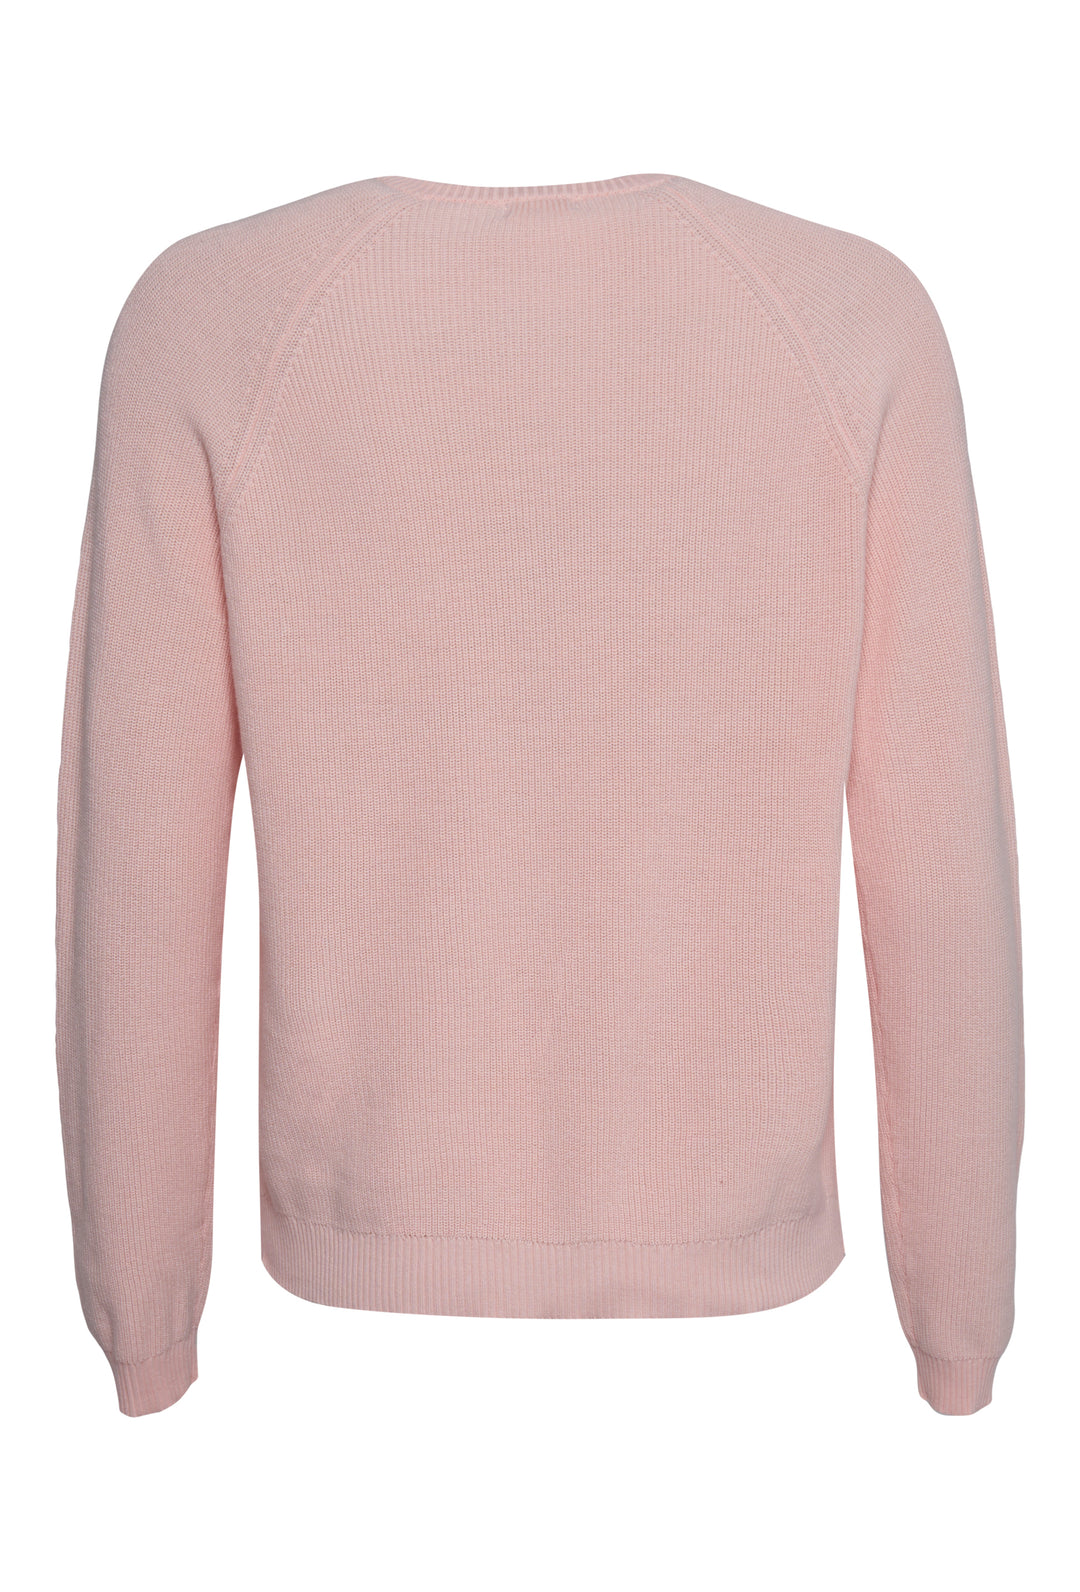 Lind Maud Knit Pullover 560 Dusty rose